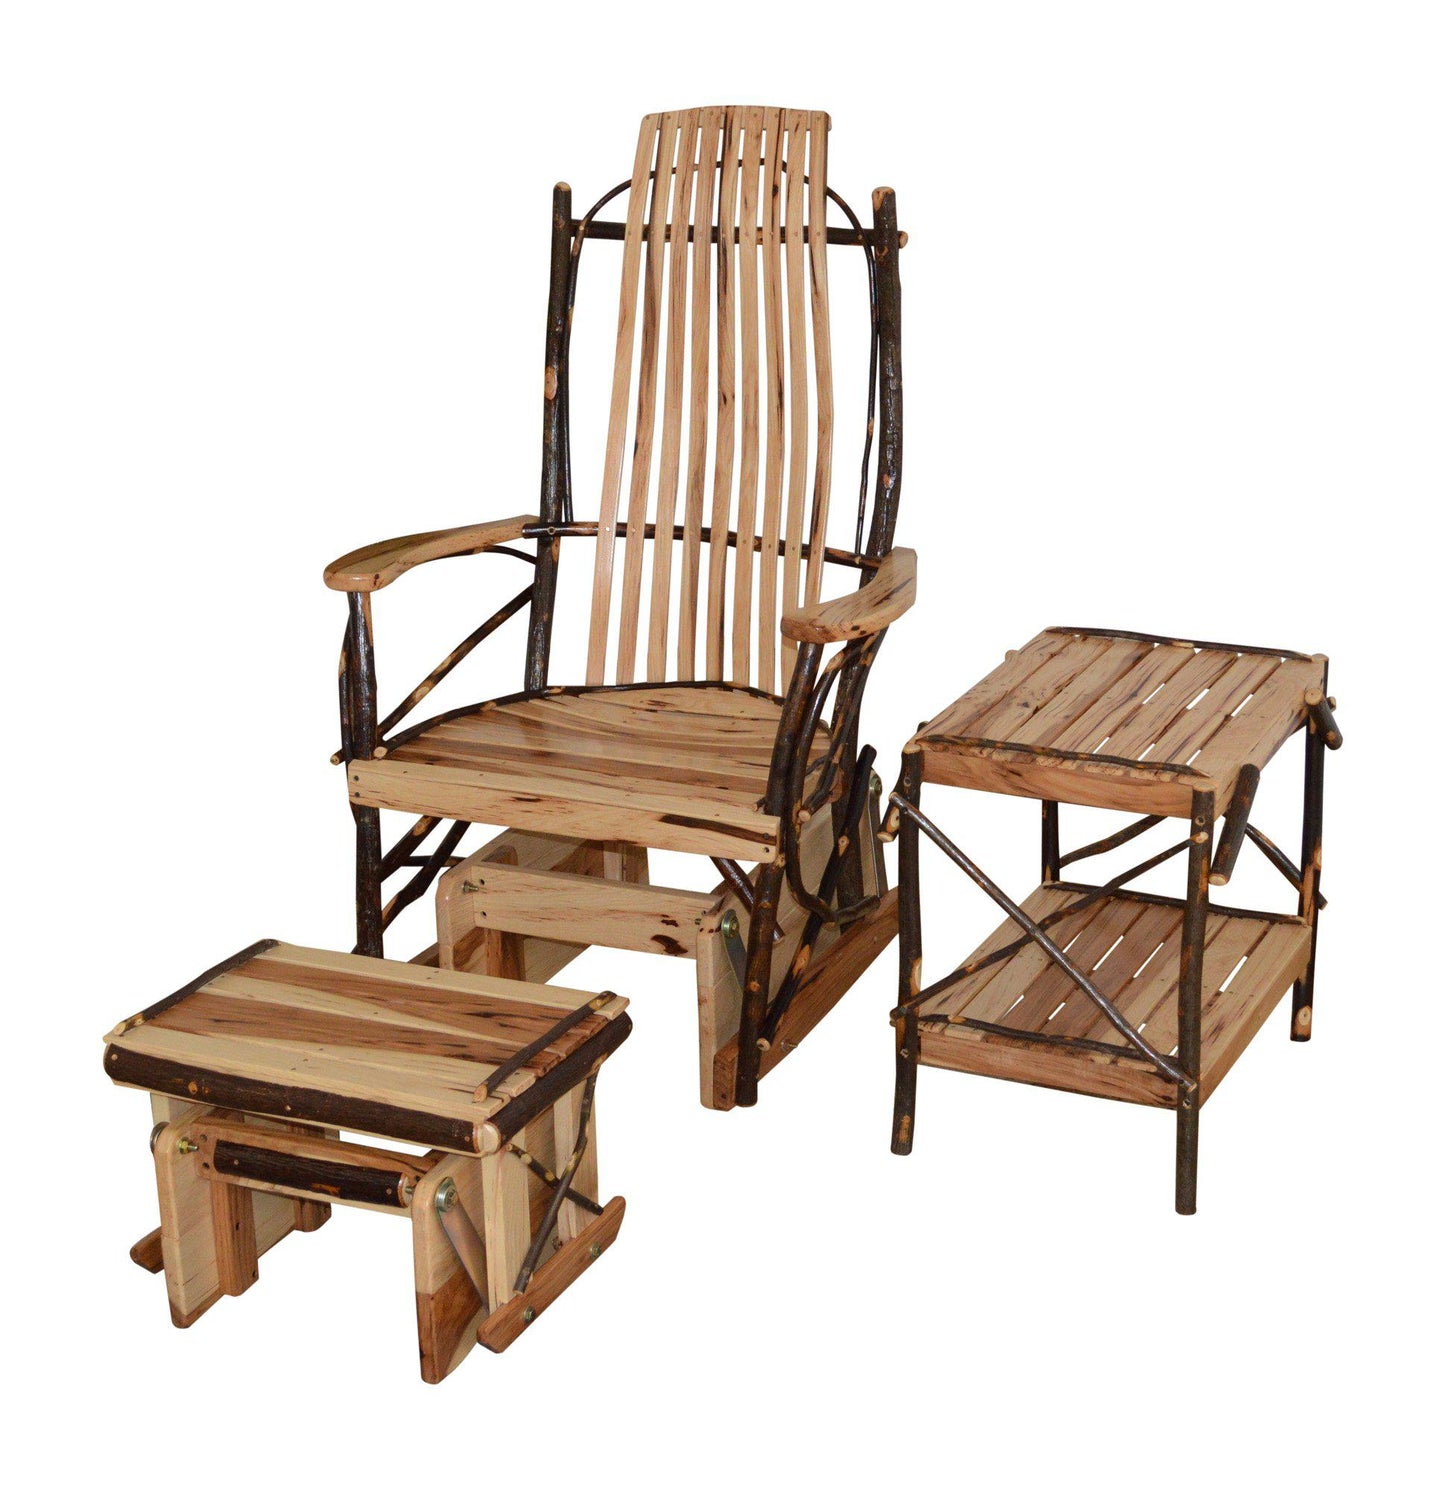 A&L Furniture Co. Amish Bentwood Hickory Glider Rocker With Gliding Ottoman and End Table Set - LEAD TIME TO SHIP 4 WEEKS OR LESS